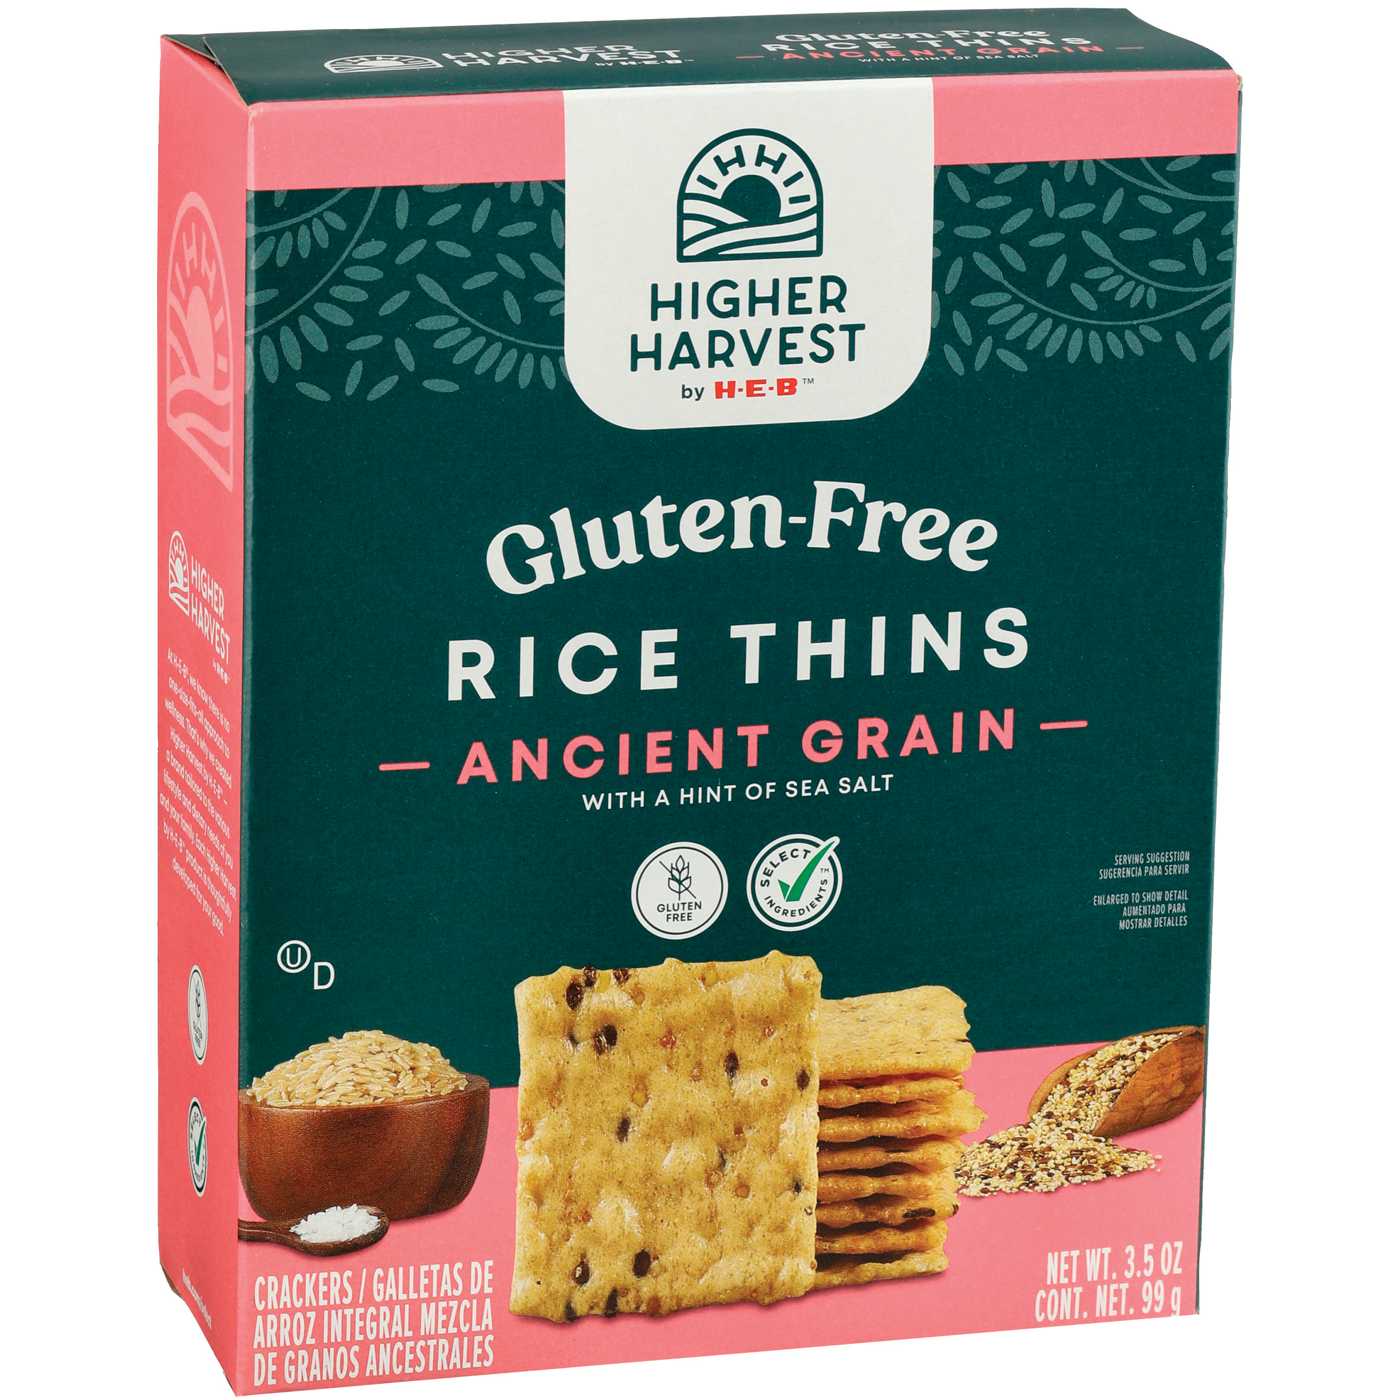 Higher Harvest by H-E-B Gluten-Free Rice Thins – Ancient Grain; image 2 of 3